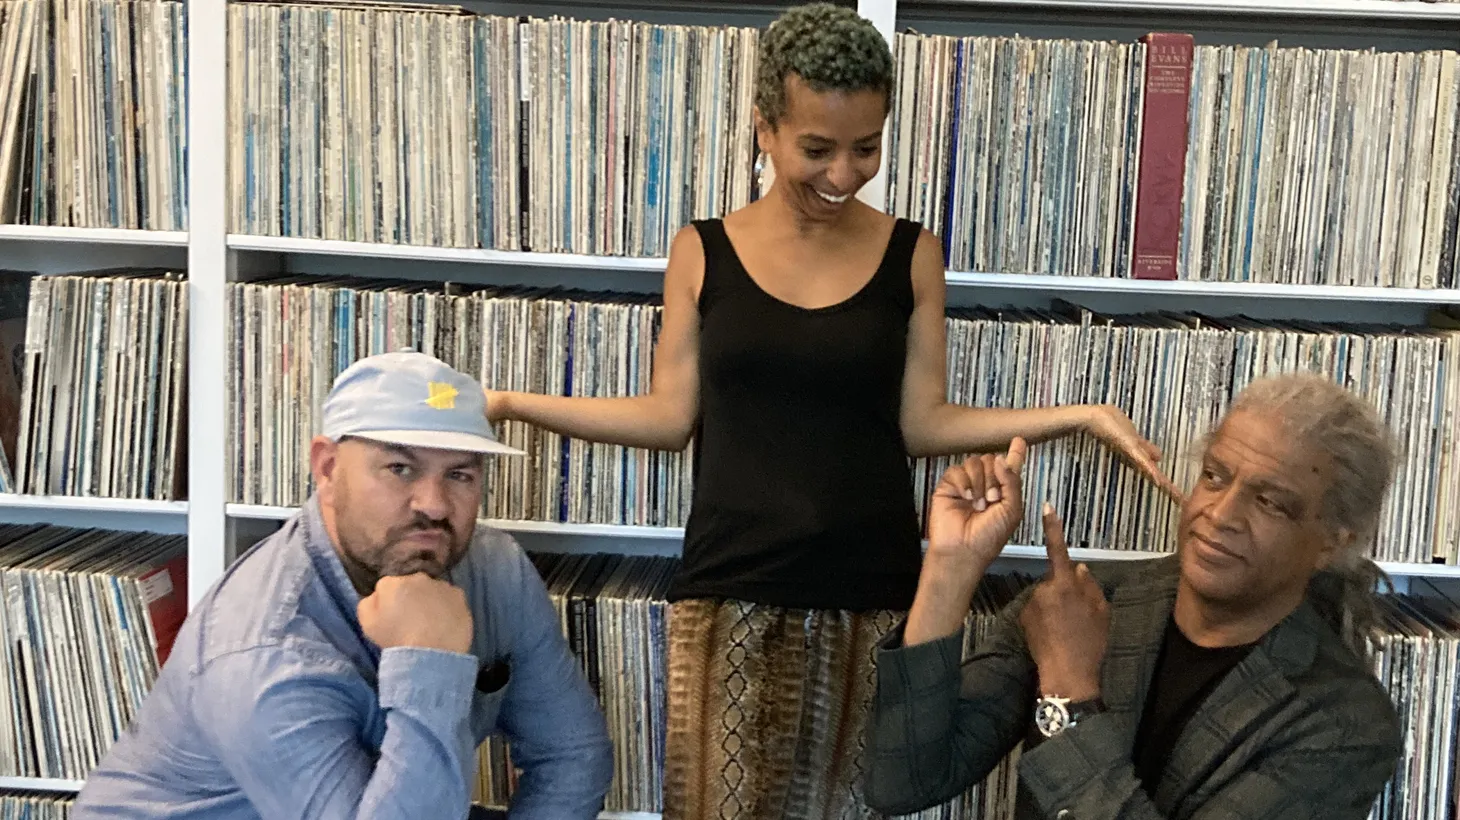 Elvis Mitchell hangs with Novena and Anthony at KCRW HQ.